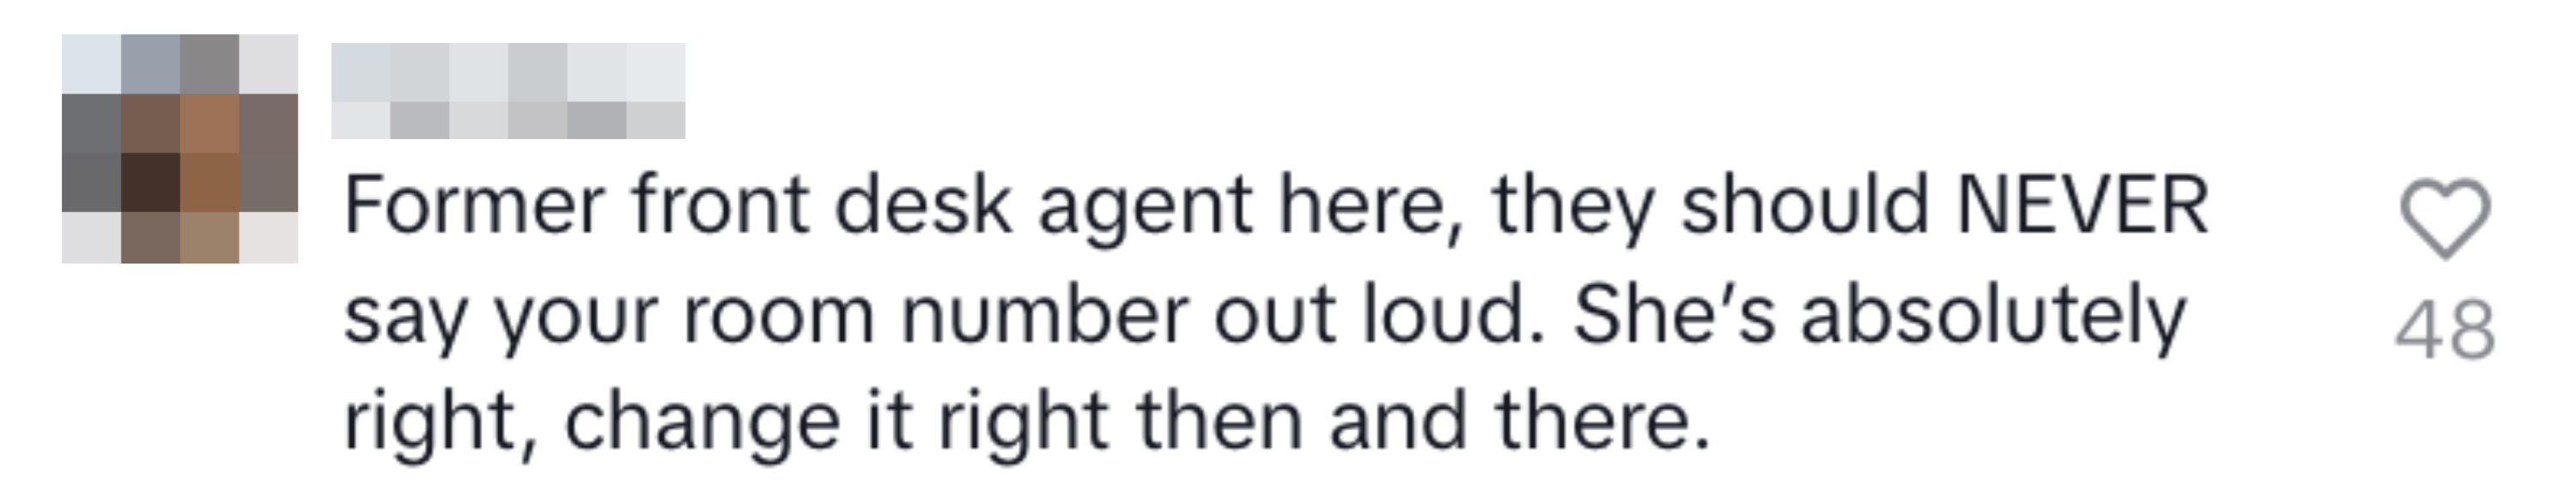 A comment advising to change hotel rooms if the room number is said aloud for security